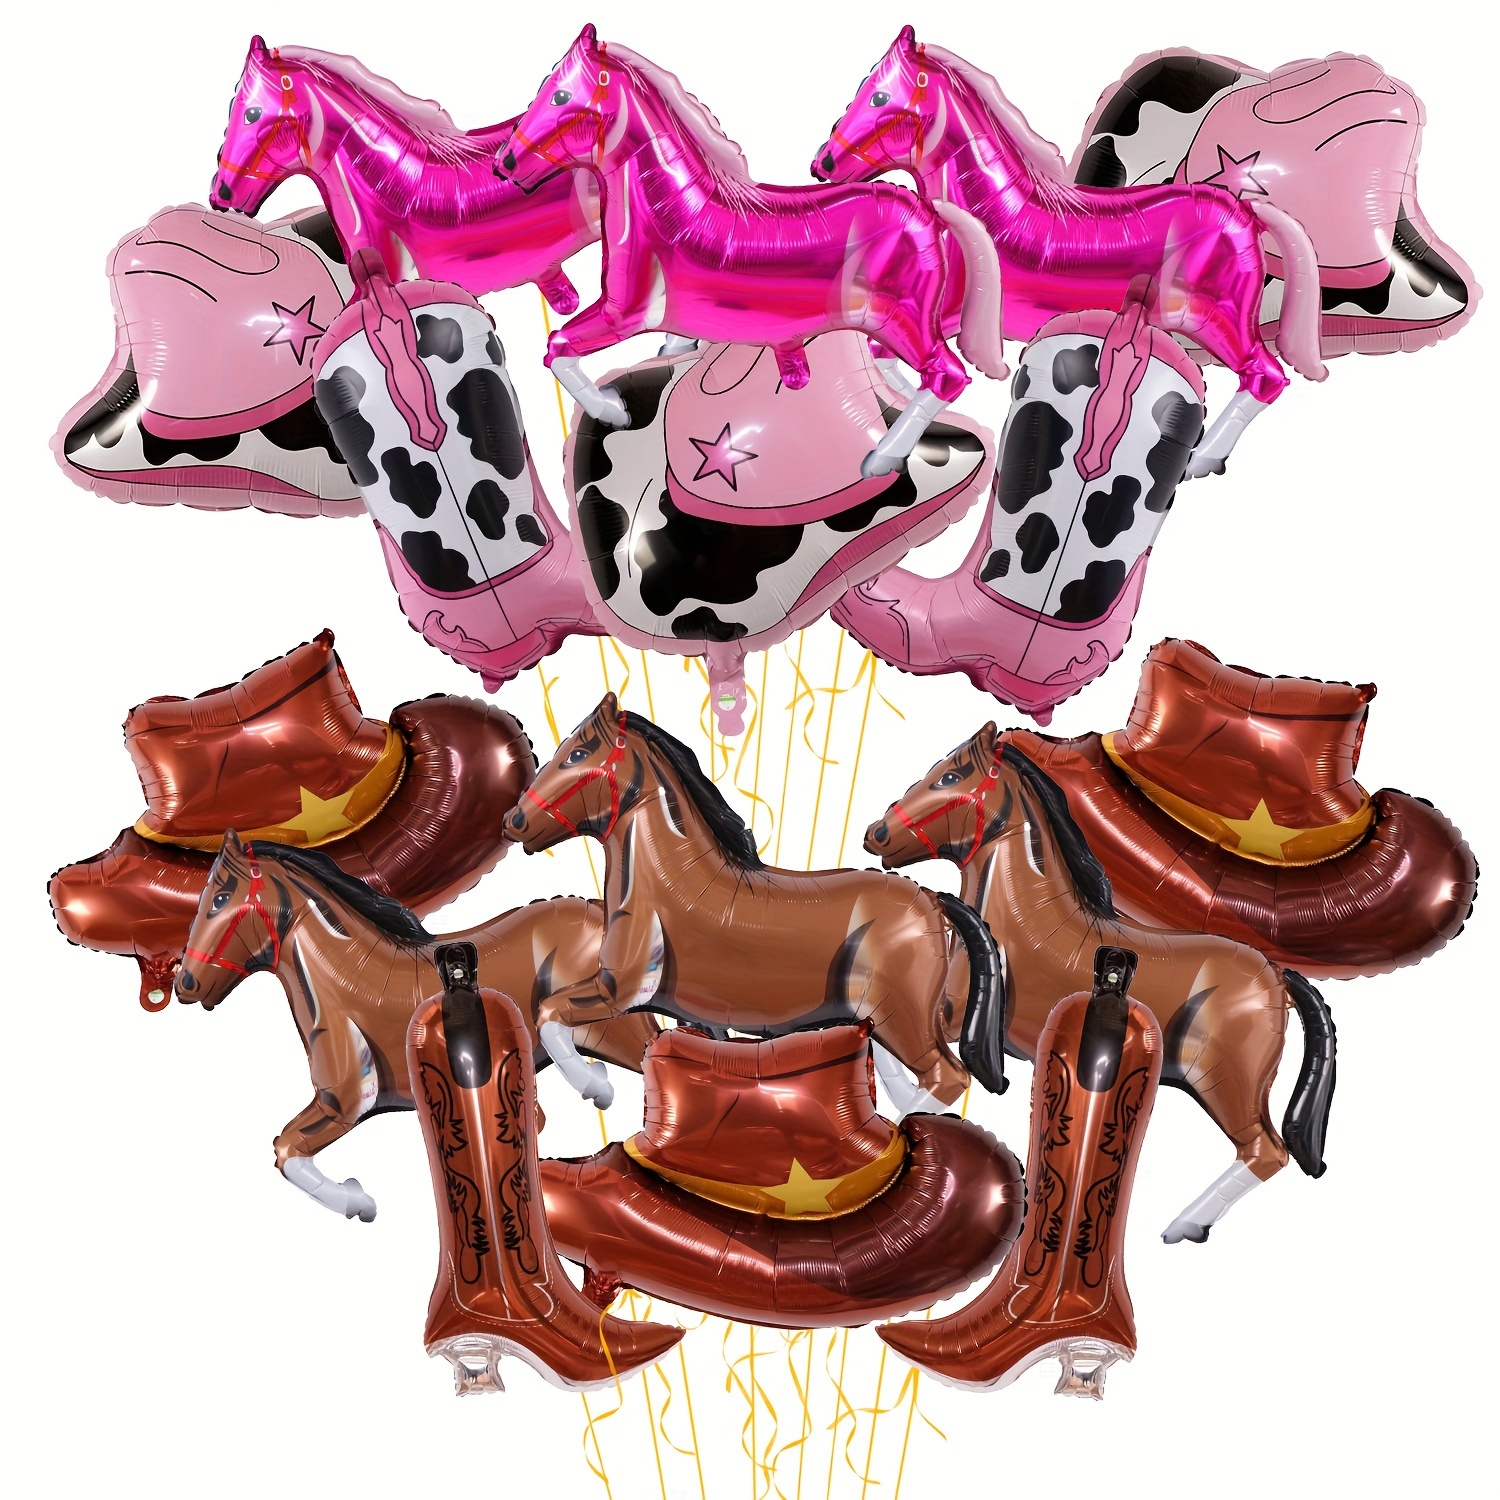 

Western Cowboy Themed Party Decorations: 8 Pieces - Large Brown Cowboy Boots & Hats, Balloons, 32 Feet Golden Ribbon Roll, Perfect For Birthday, Bachelor Party, Dance, Or Western Theme Events